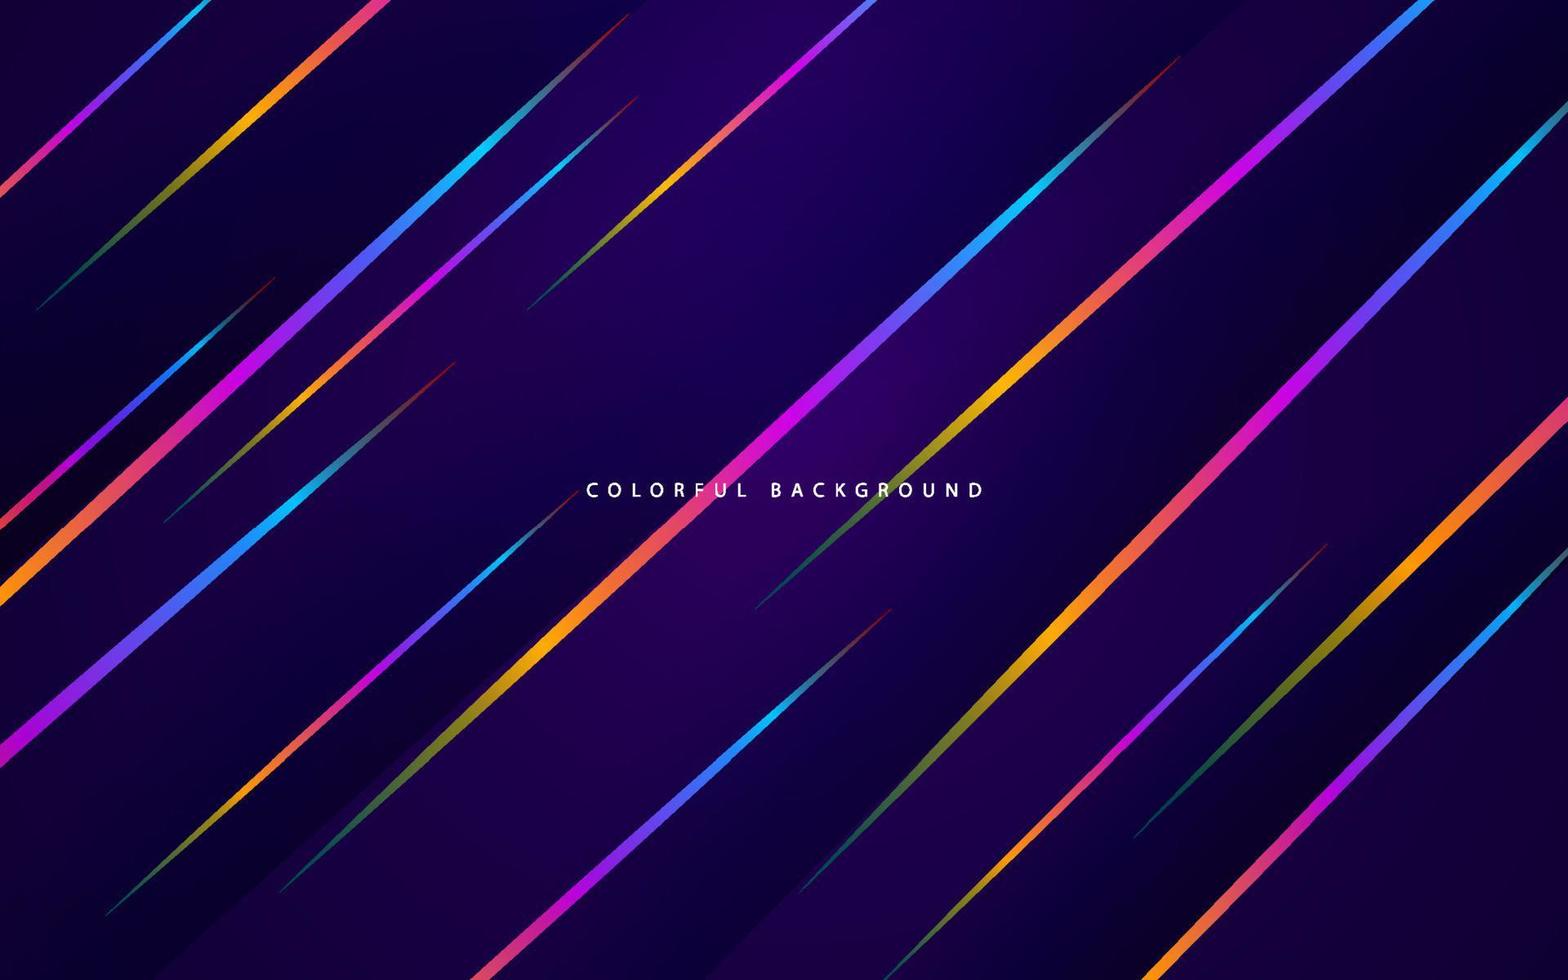 Abstract geometric with lines colorful background vector